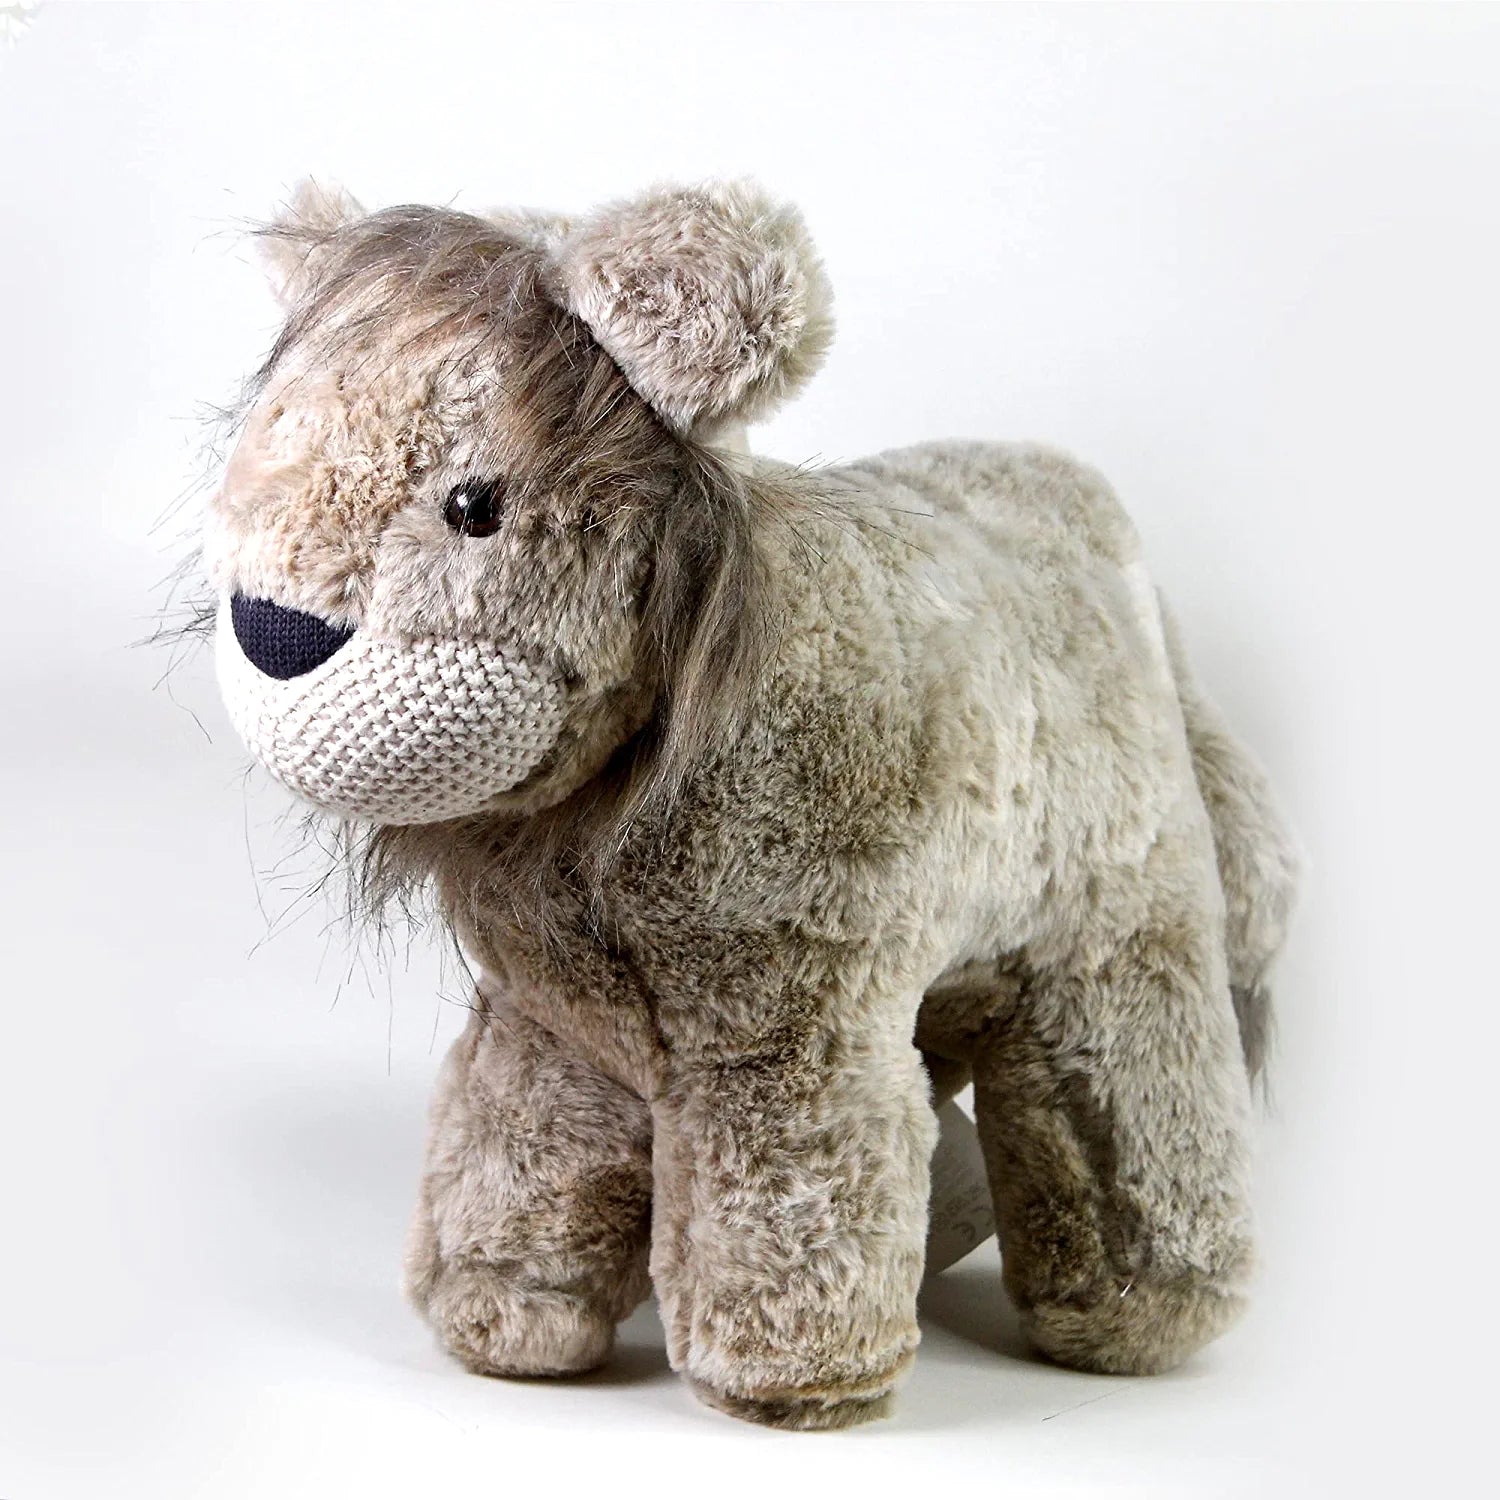 Stuffed Lion Animal Baby Toys Super Soft Fabric & Filling Toy for Girl/Boys (Cream Gray)